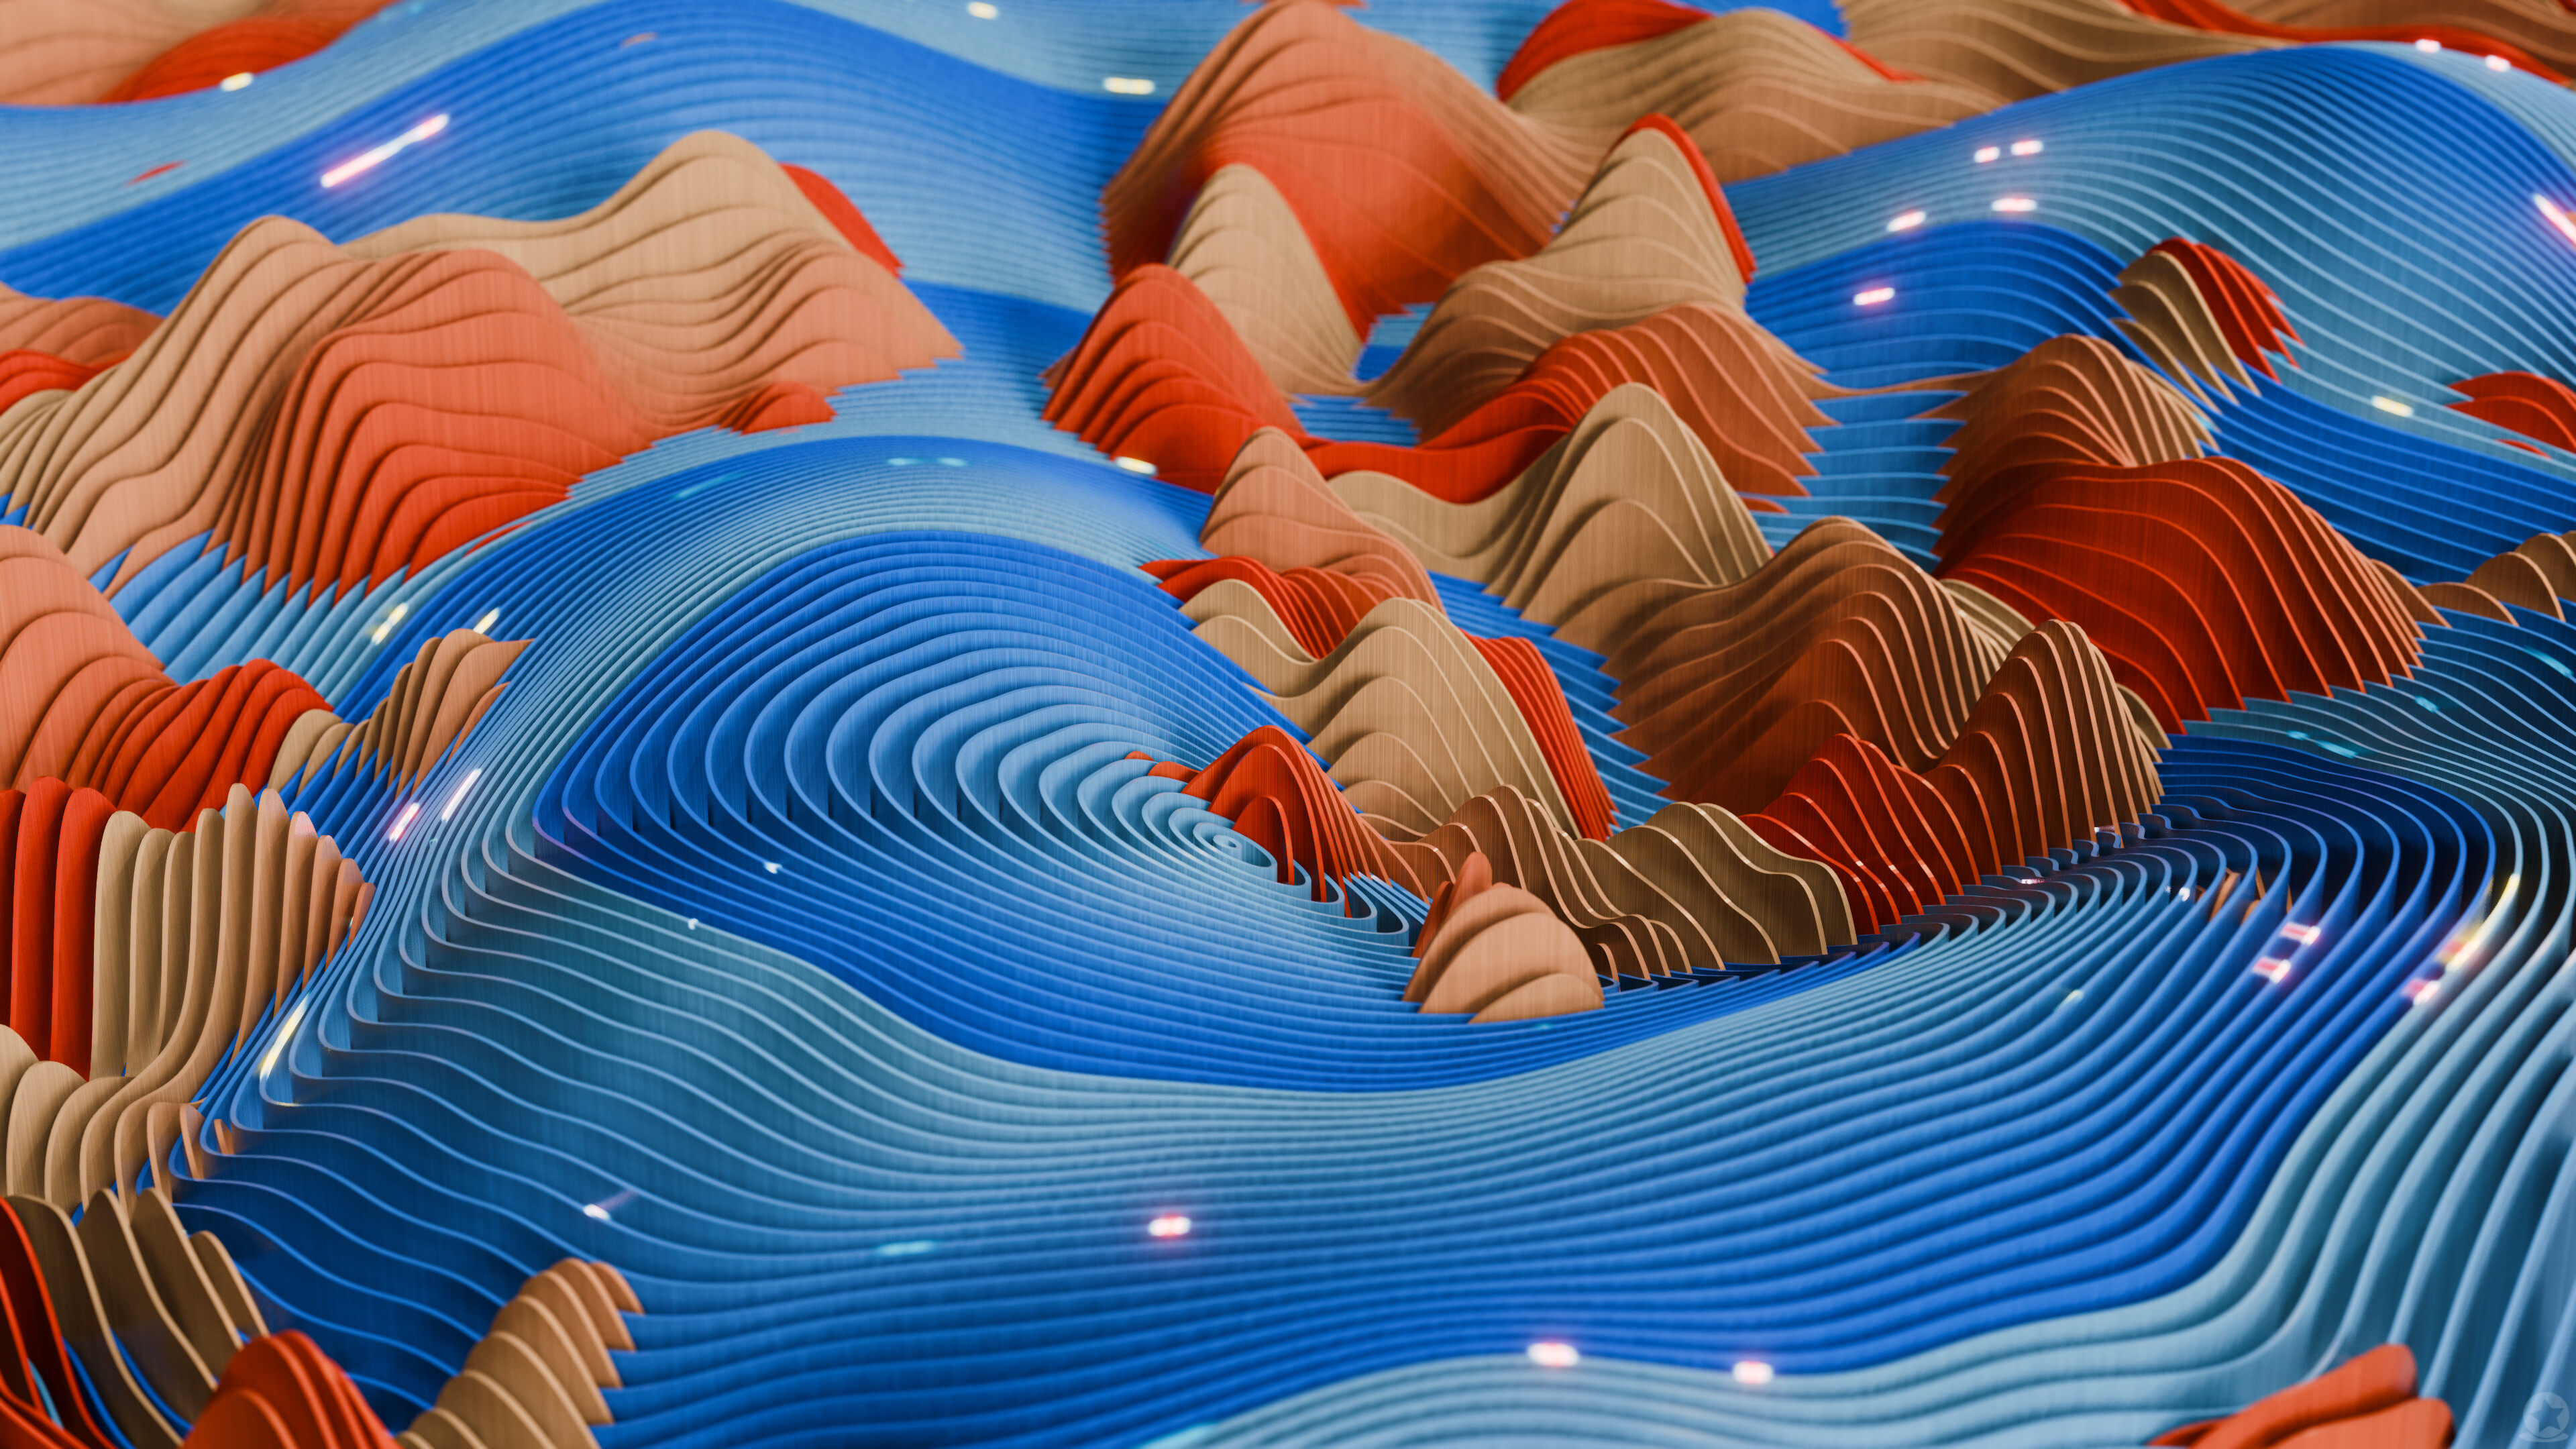 Blender Abstract 3D Abstract Colorful Waveforms Waves 3840x2160